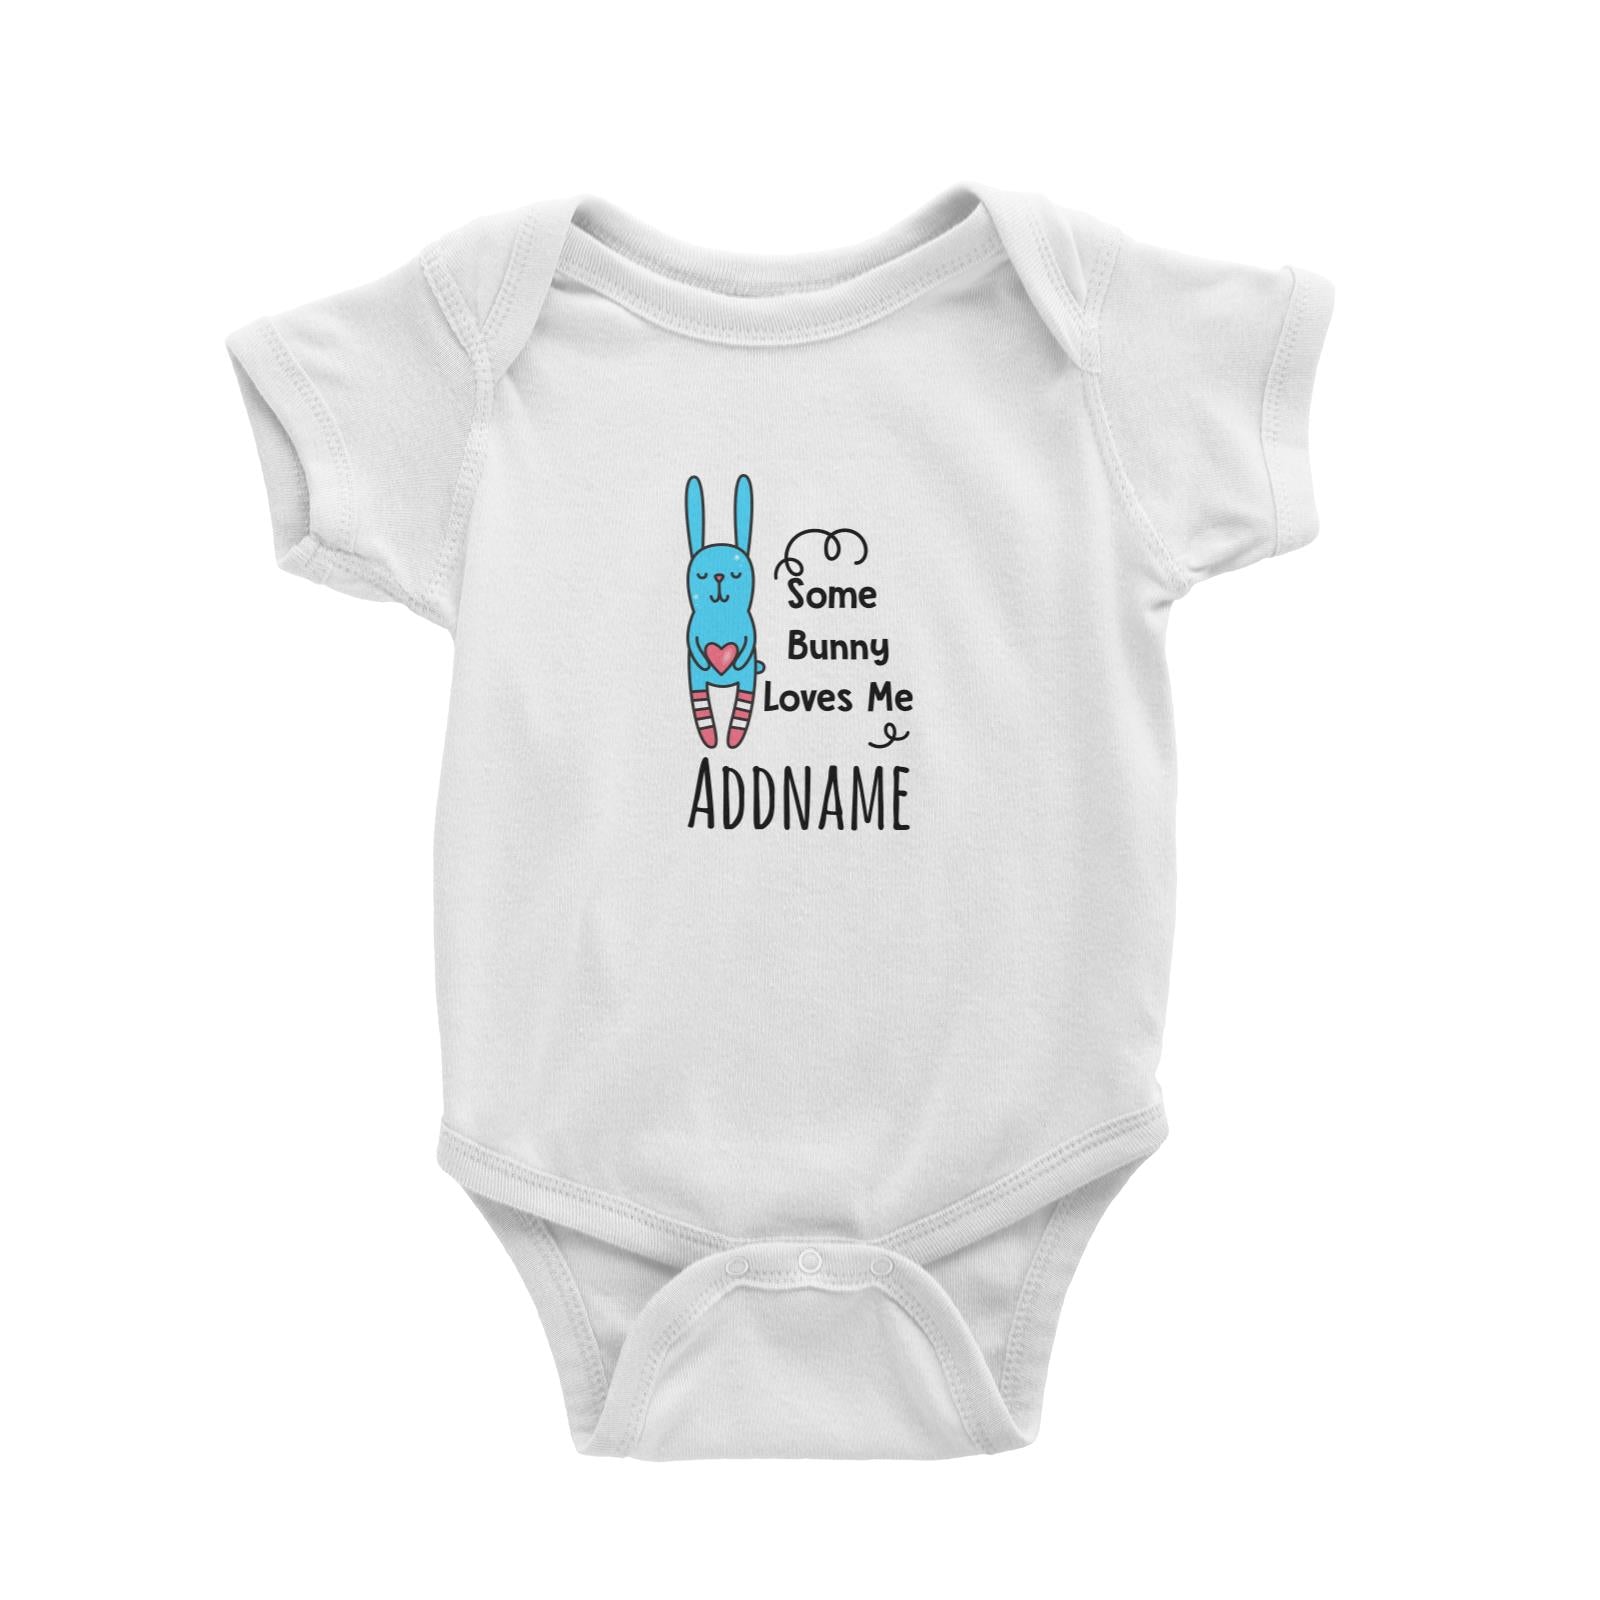 Drawn Baby Elements Some Bunny Loves Me Addname Baby Romper